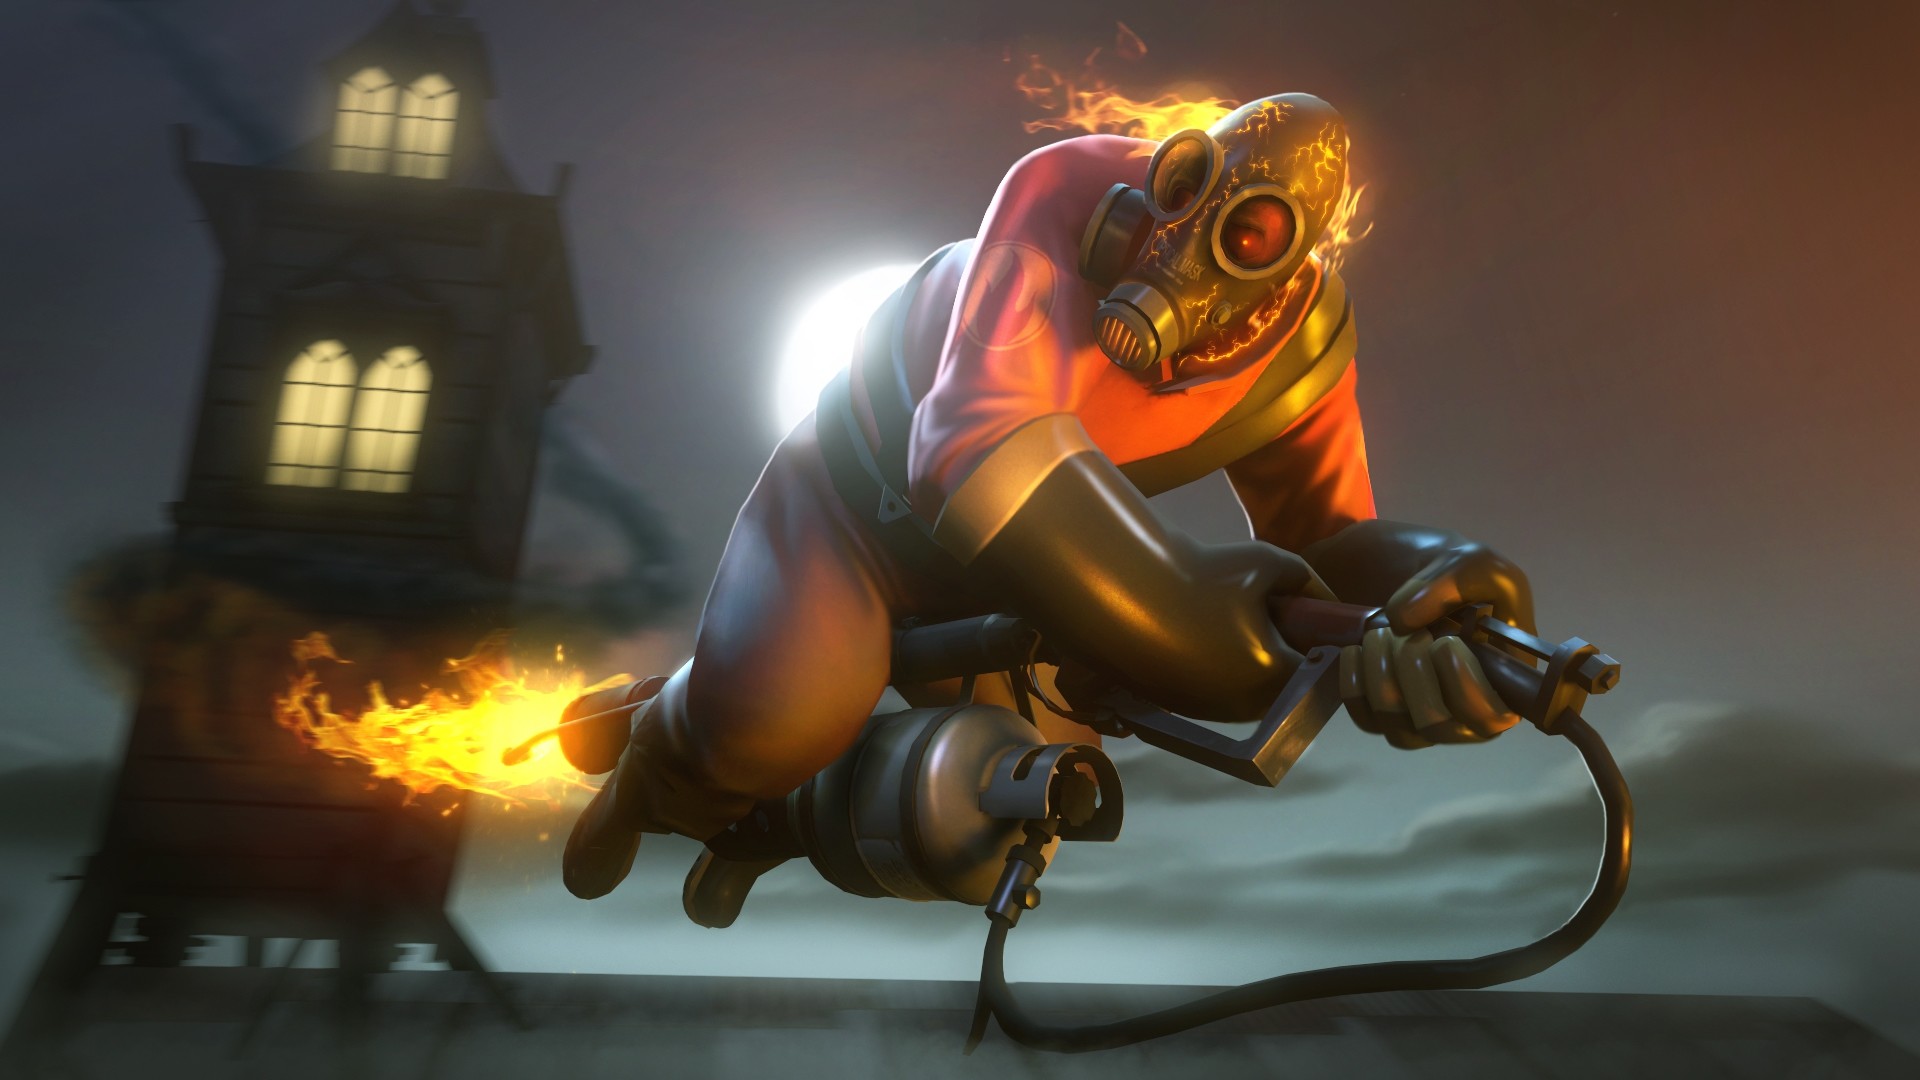 1920x1080 Team Fortress 2, Pyro, Fire, Flying